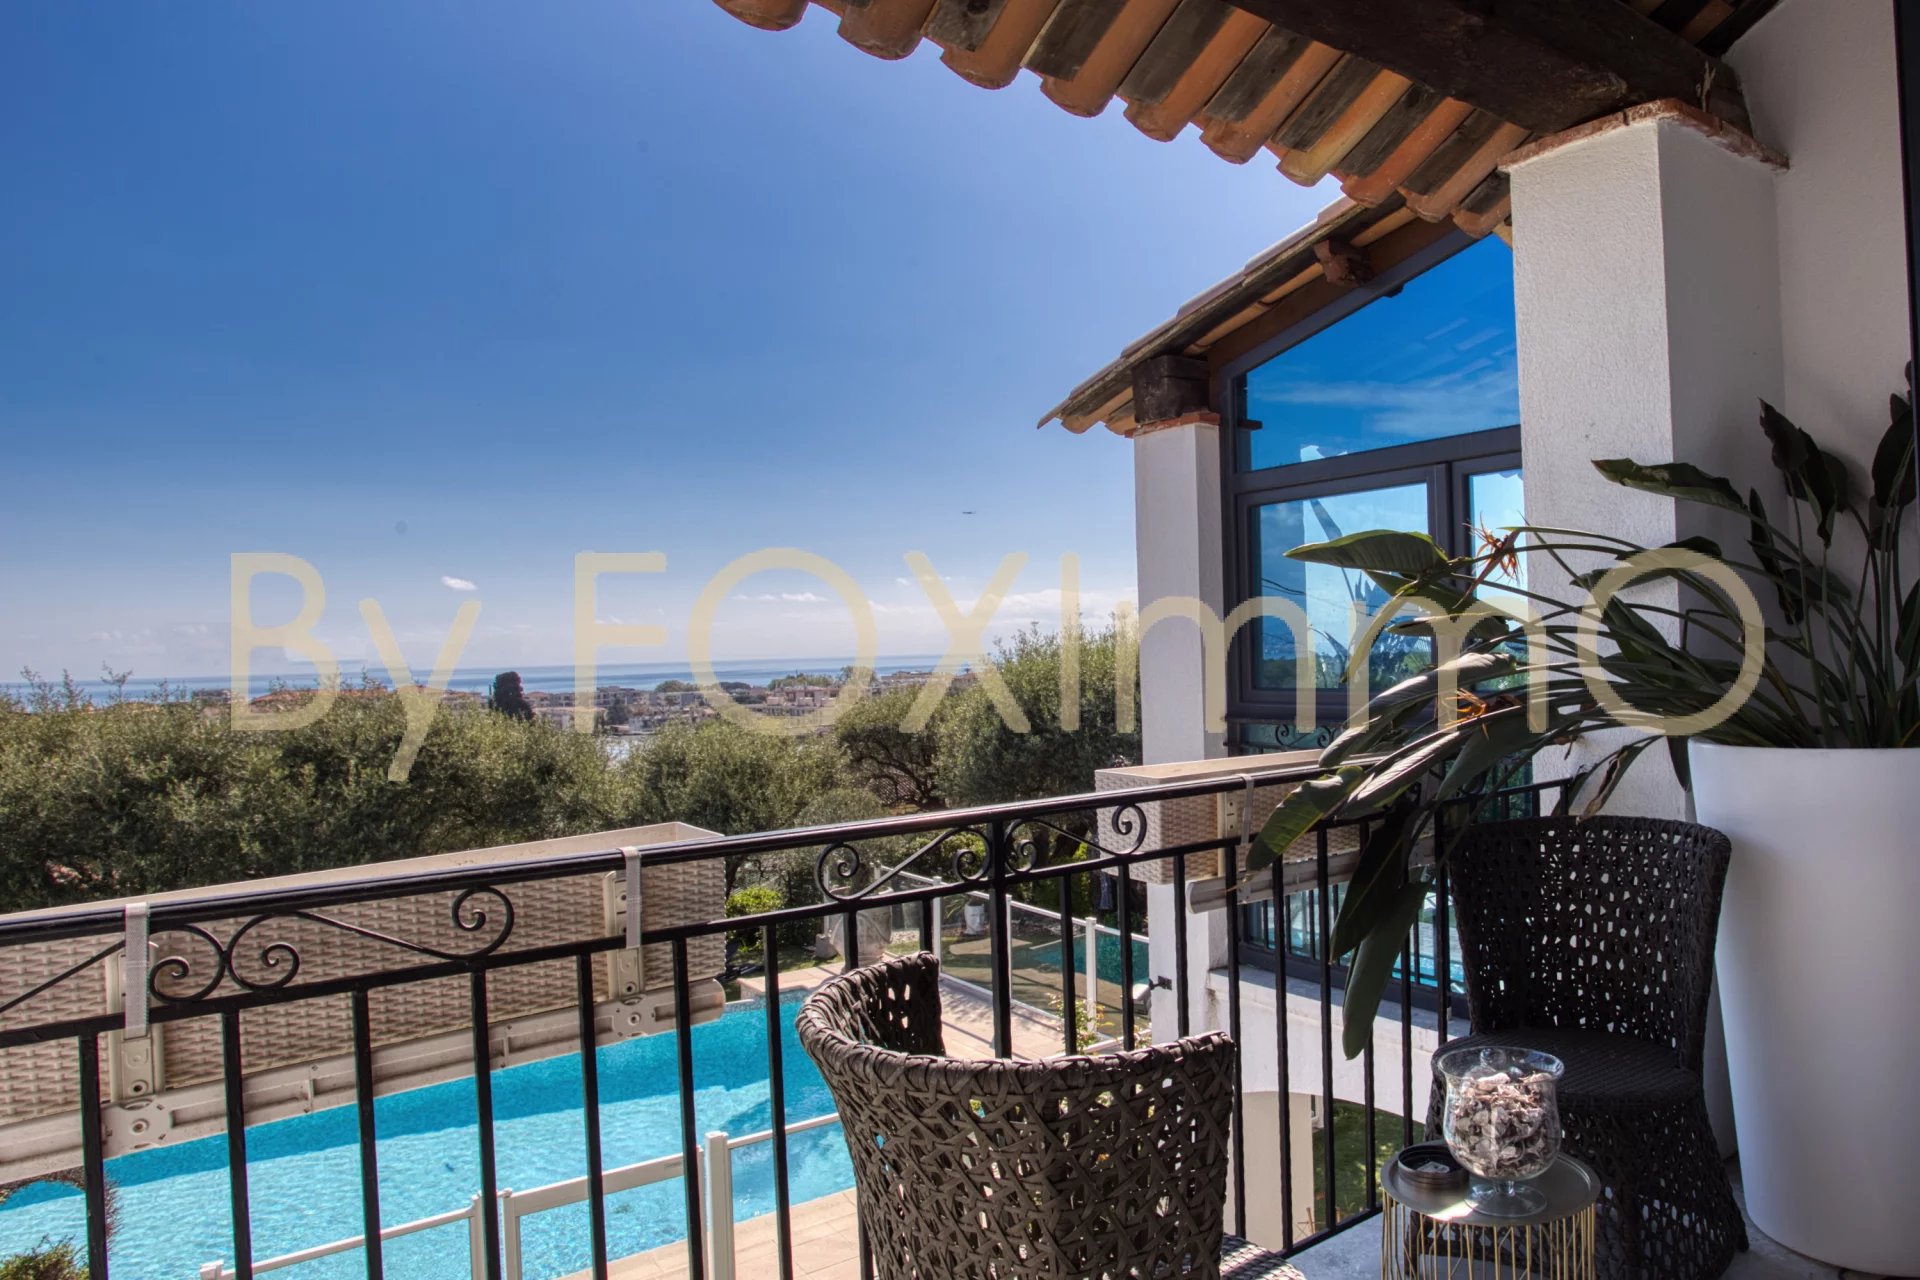 Sea view villa, 241m², fully renovated, swimming pool, terrace, garage, and parking.